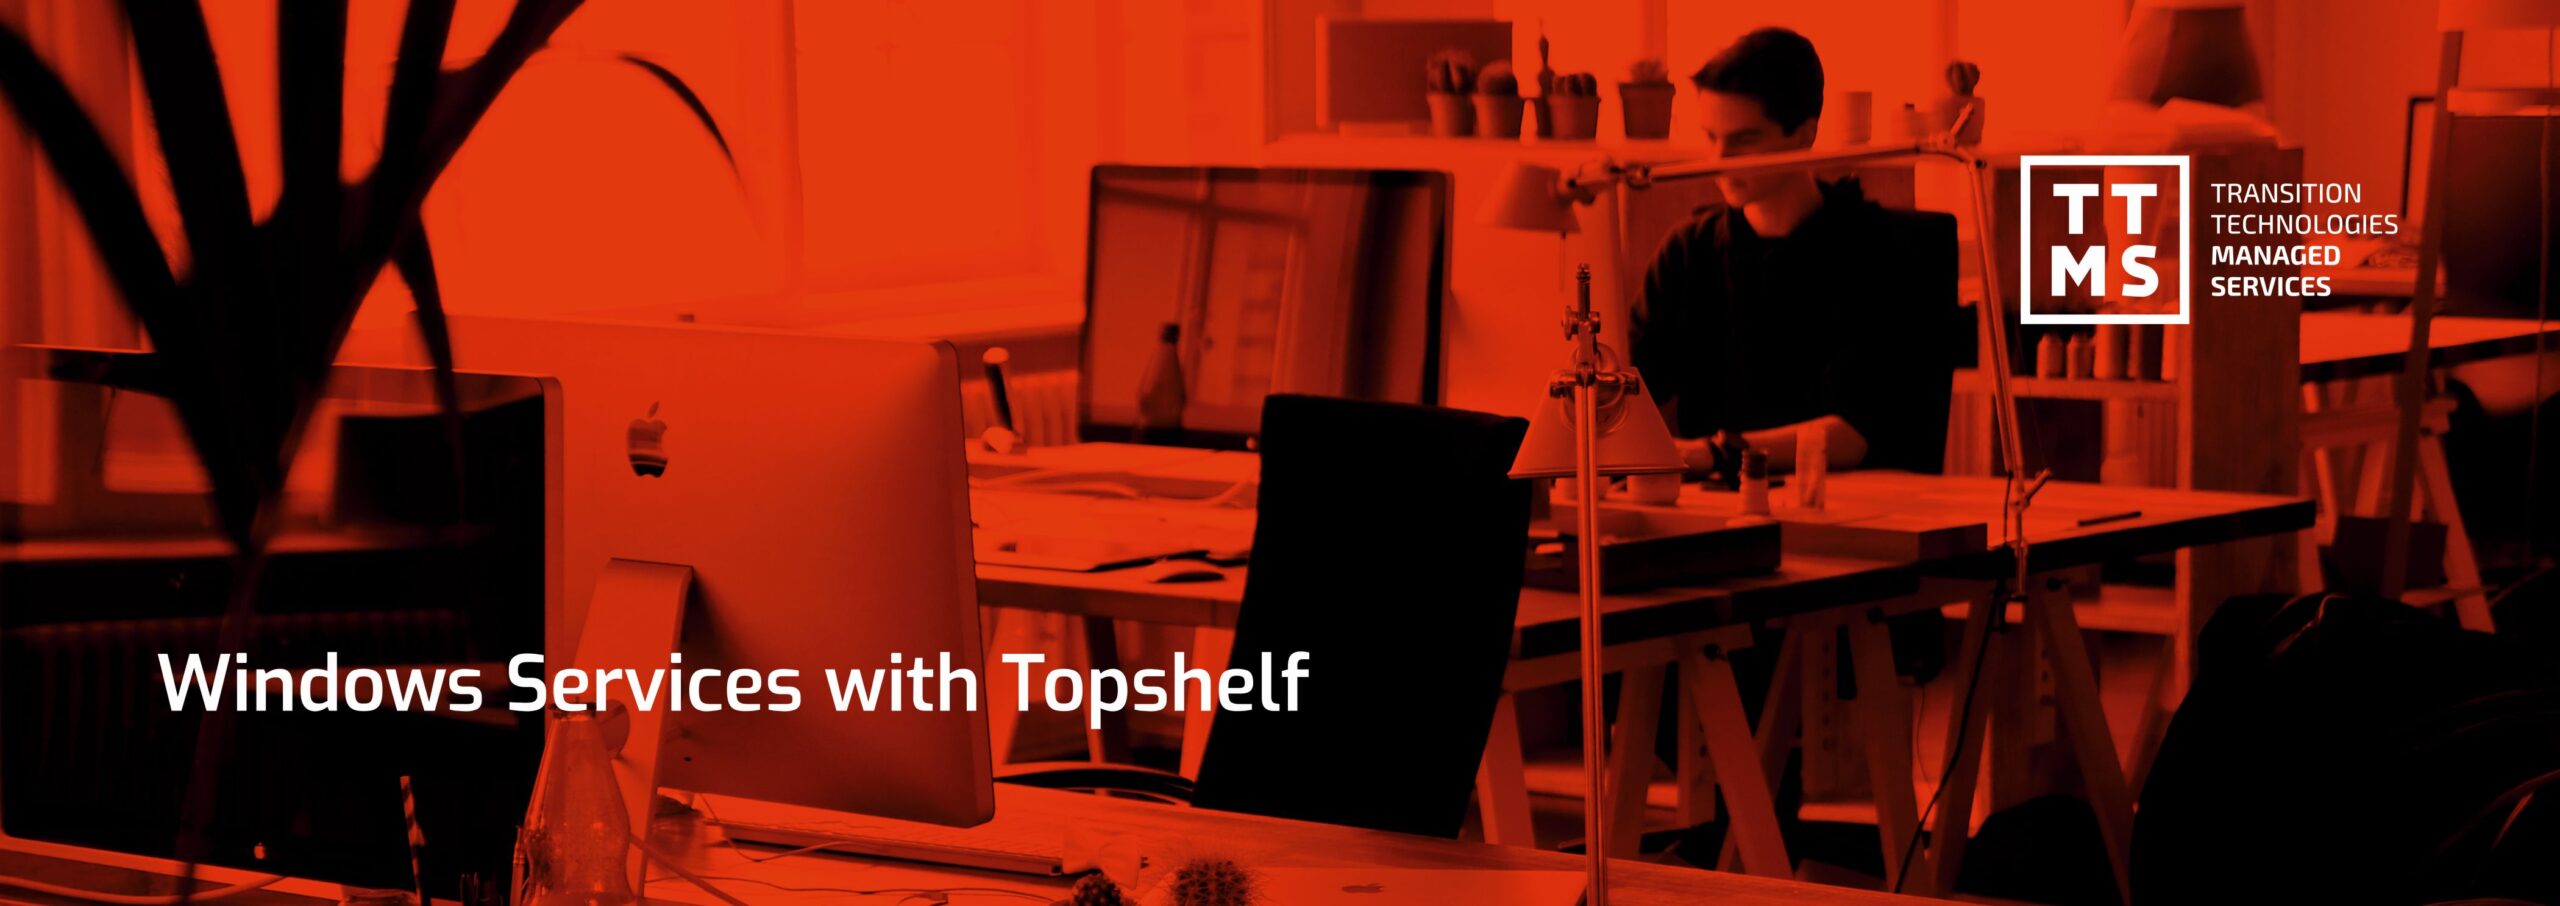 Windows Services with Topshelf